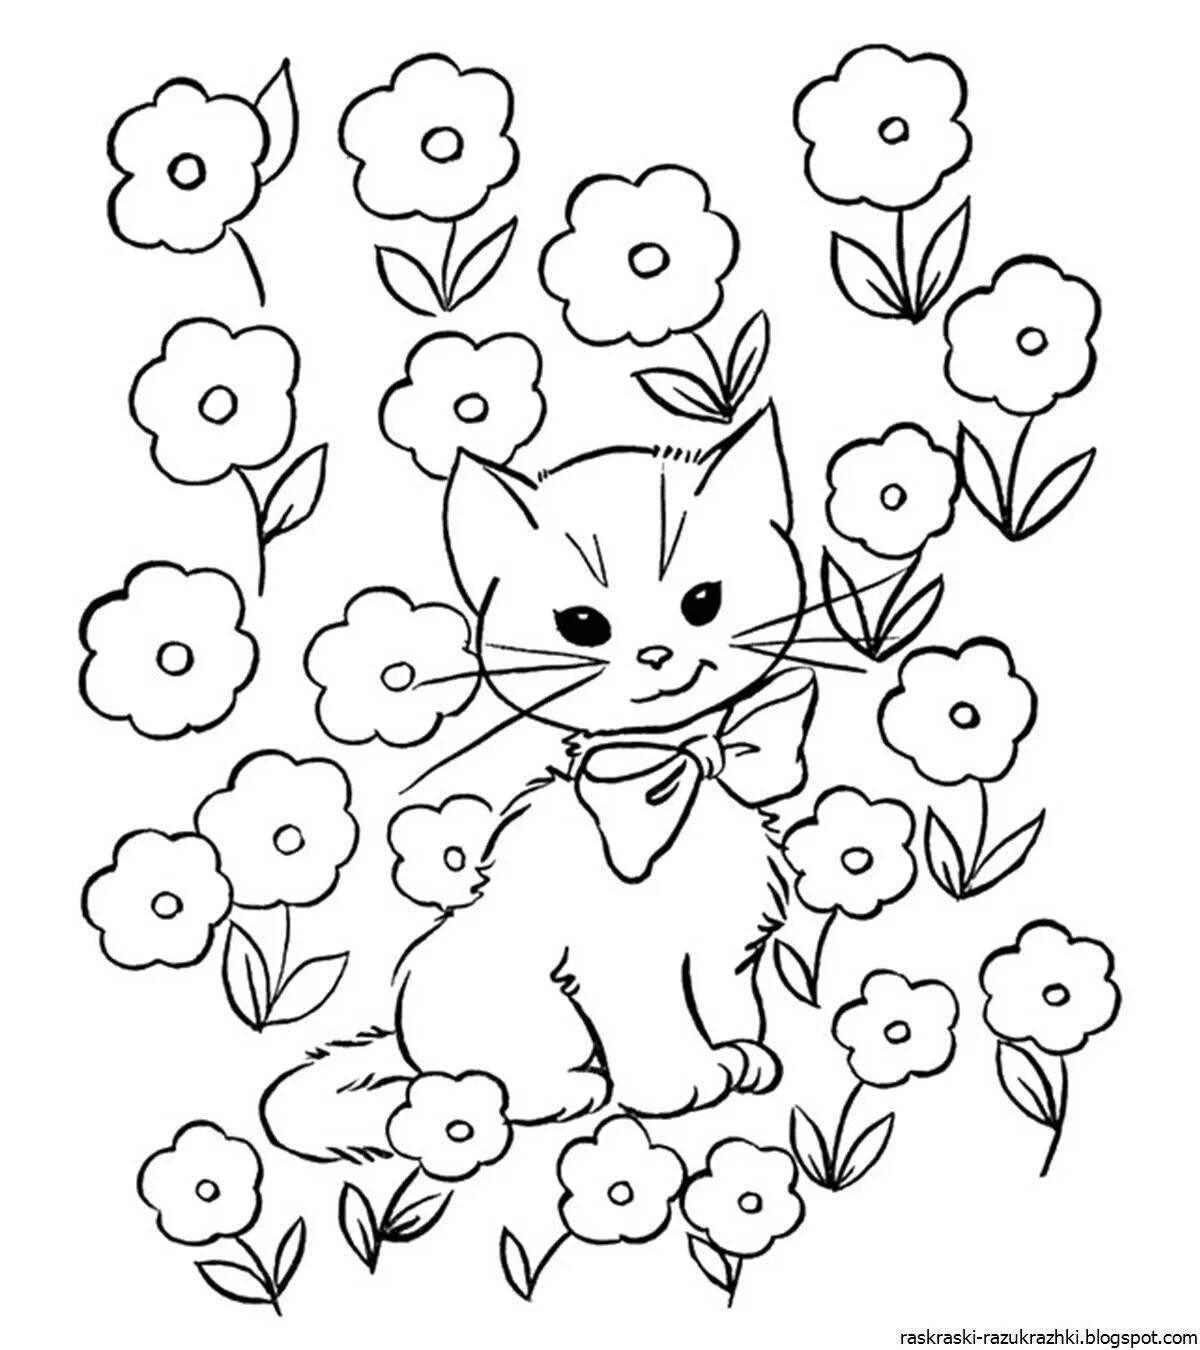 Live coloring for girls, cats and kittens